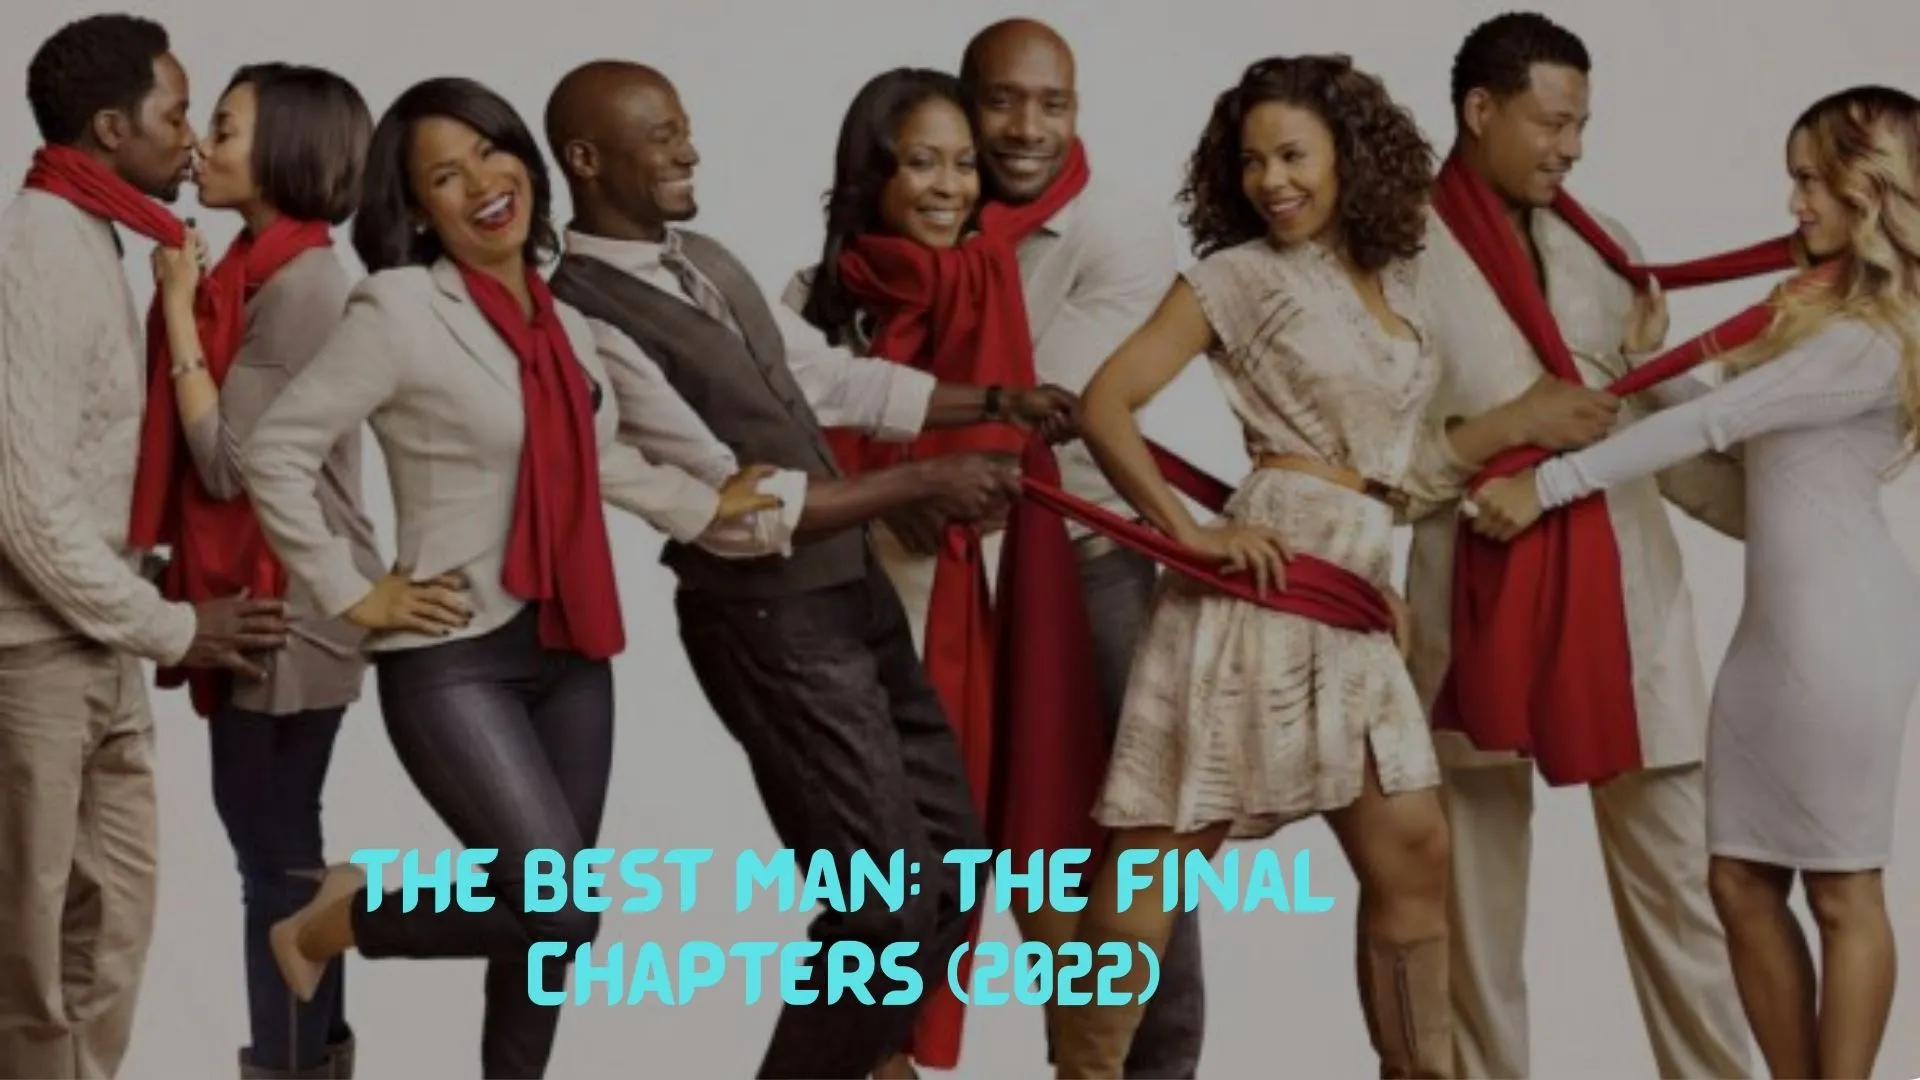 The Best Man: The Final Chapters Parents Guide